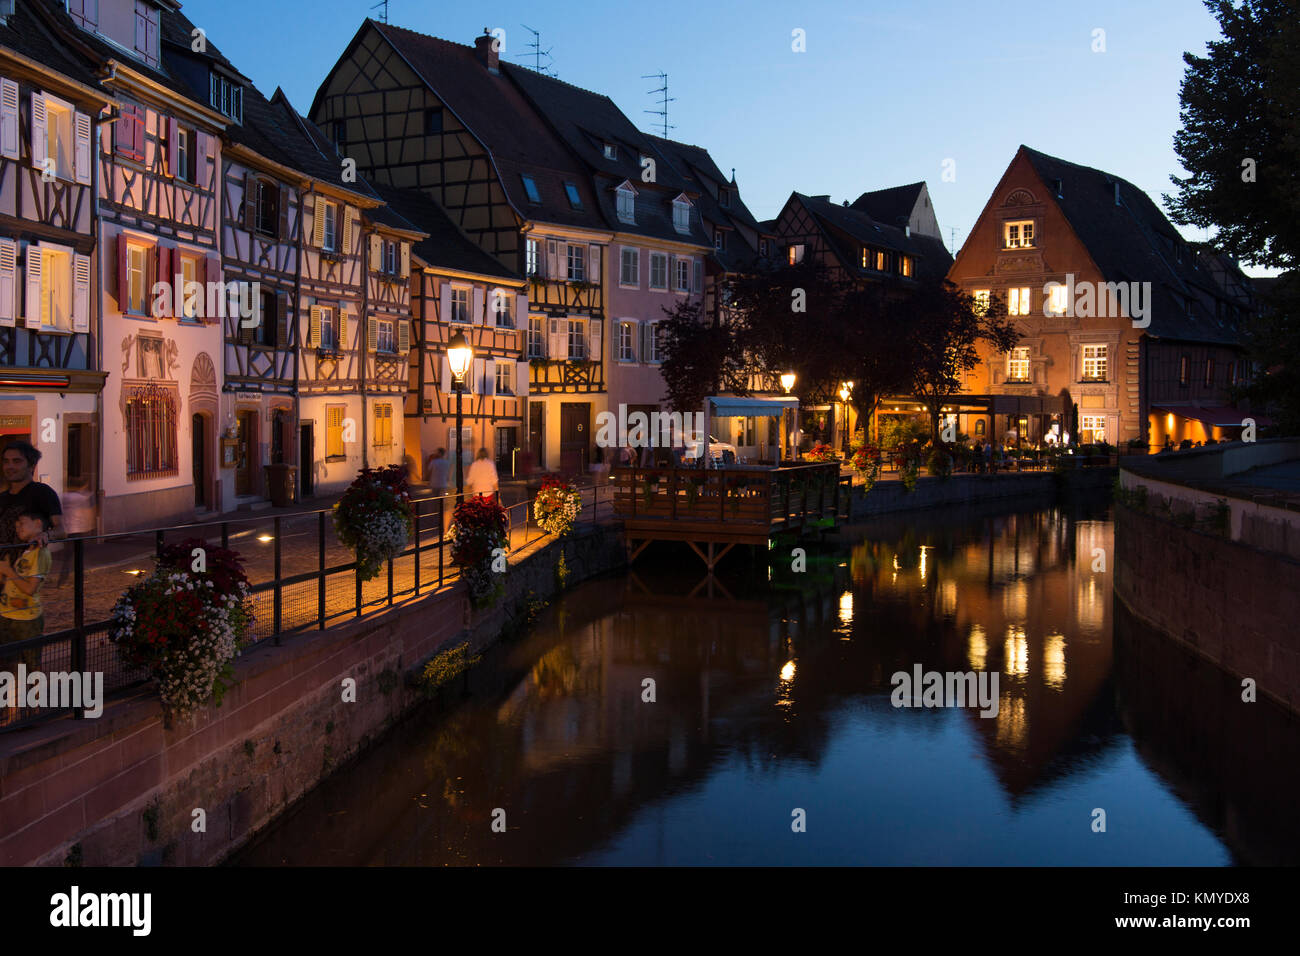 Picturesque maisons à colombages (half timbered houses) at dusk in the Petite Venice quarter of Colmar Stock Photo